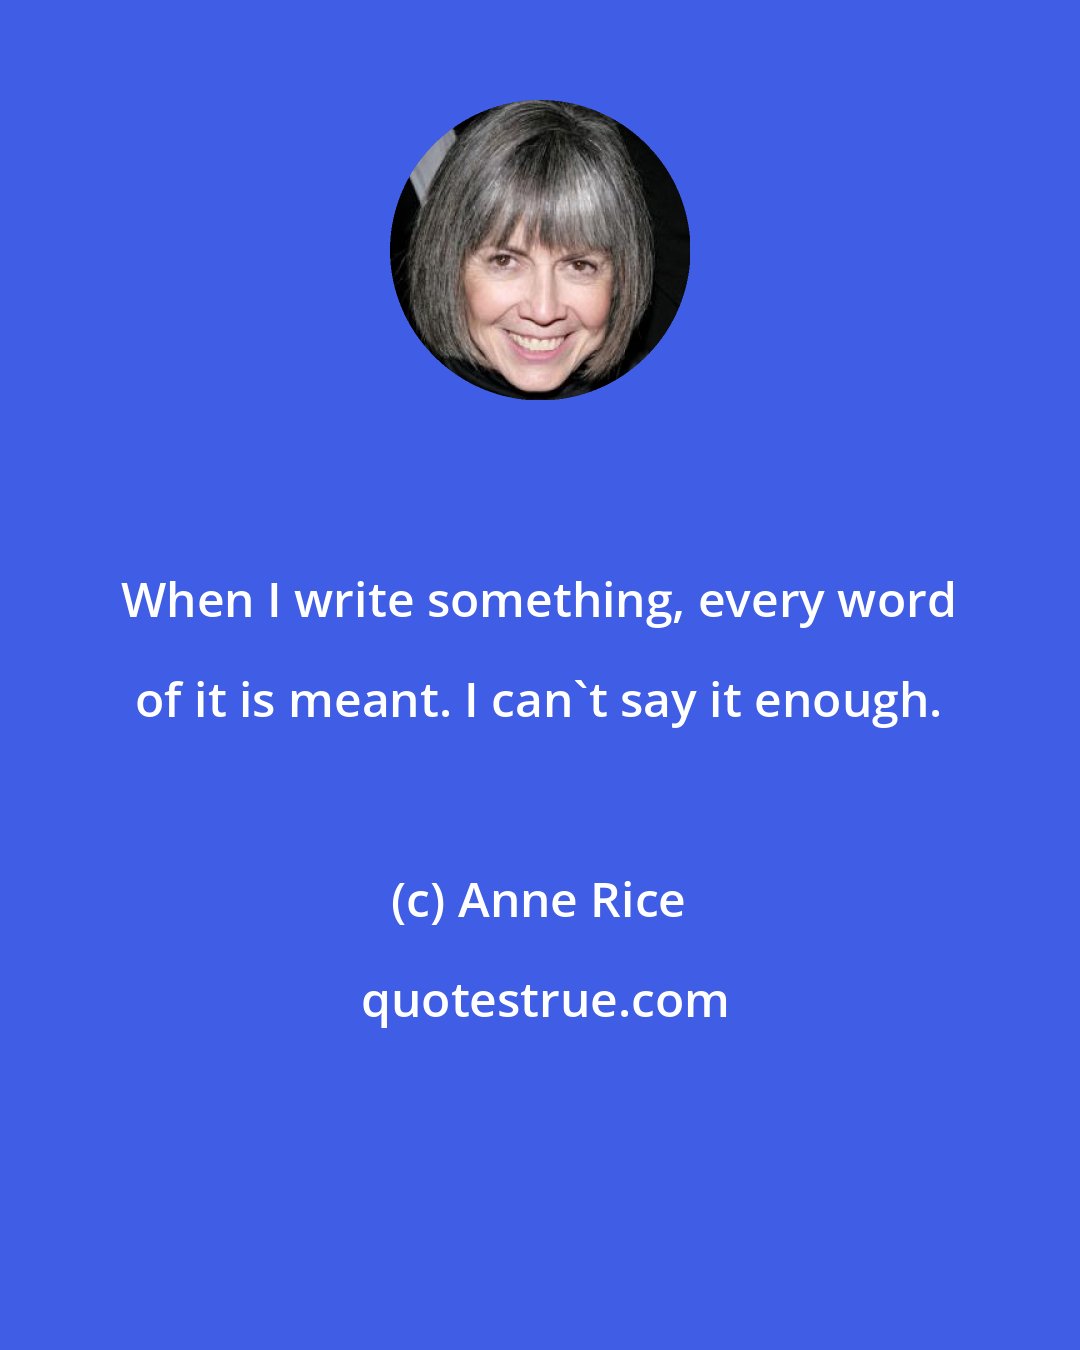 Anne Rice: When I write something, every word of it is meant. I can't say it enough.